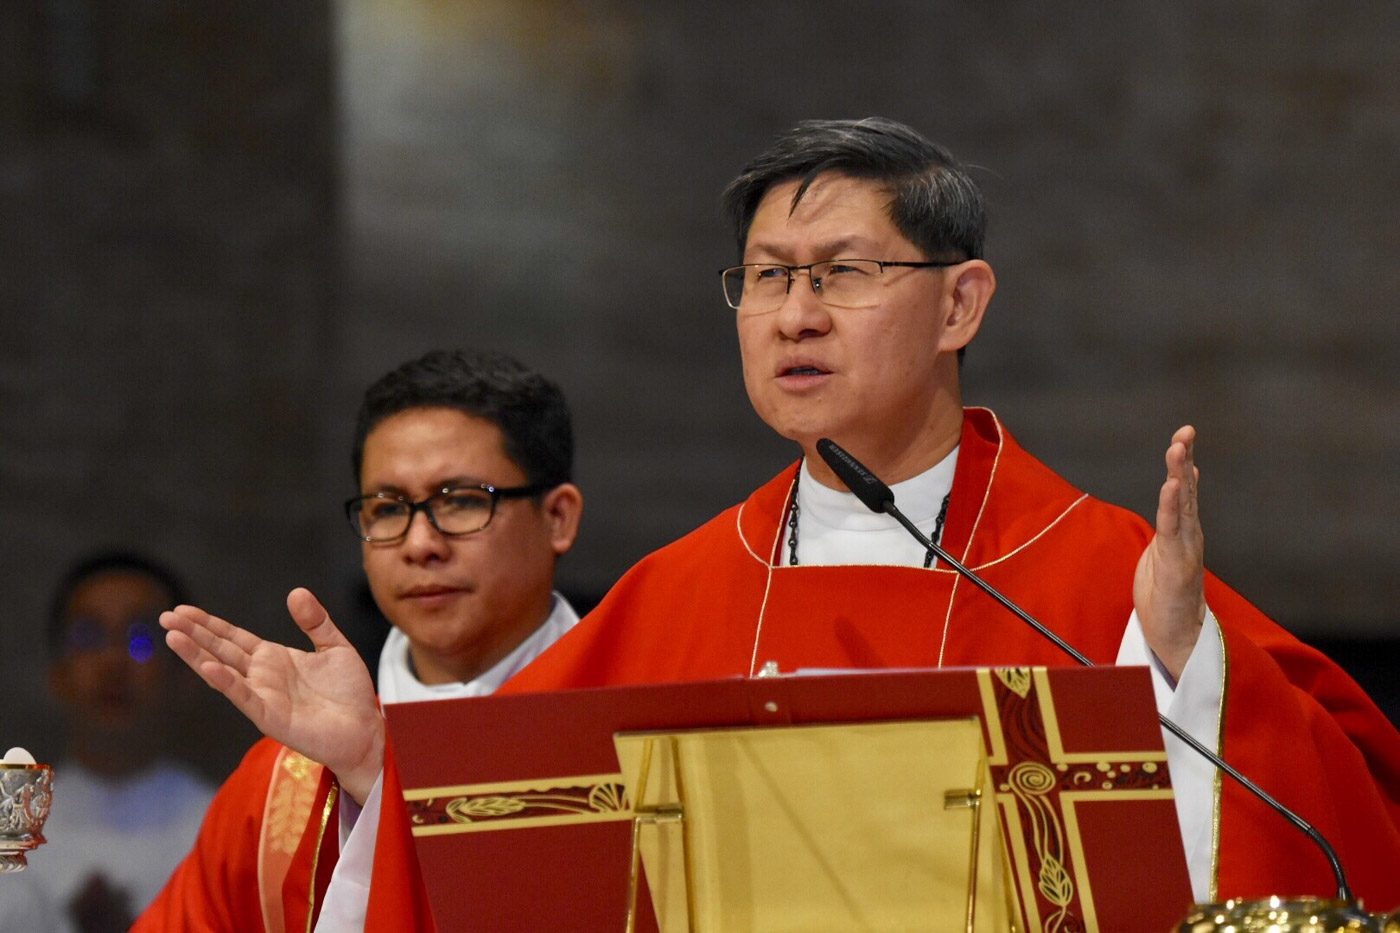 TOP PRELATE. Manila Archbishop Luis Antonio Cardinal Tagle leads the Good Friday service at the Manila Cathedral on March 30, 2018. Photo by Angie de Silva/Rappler    